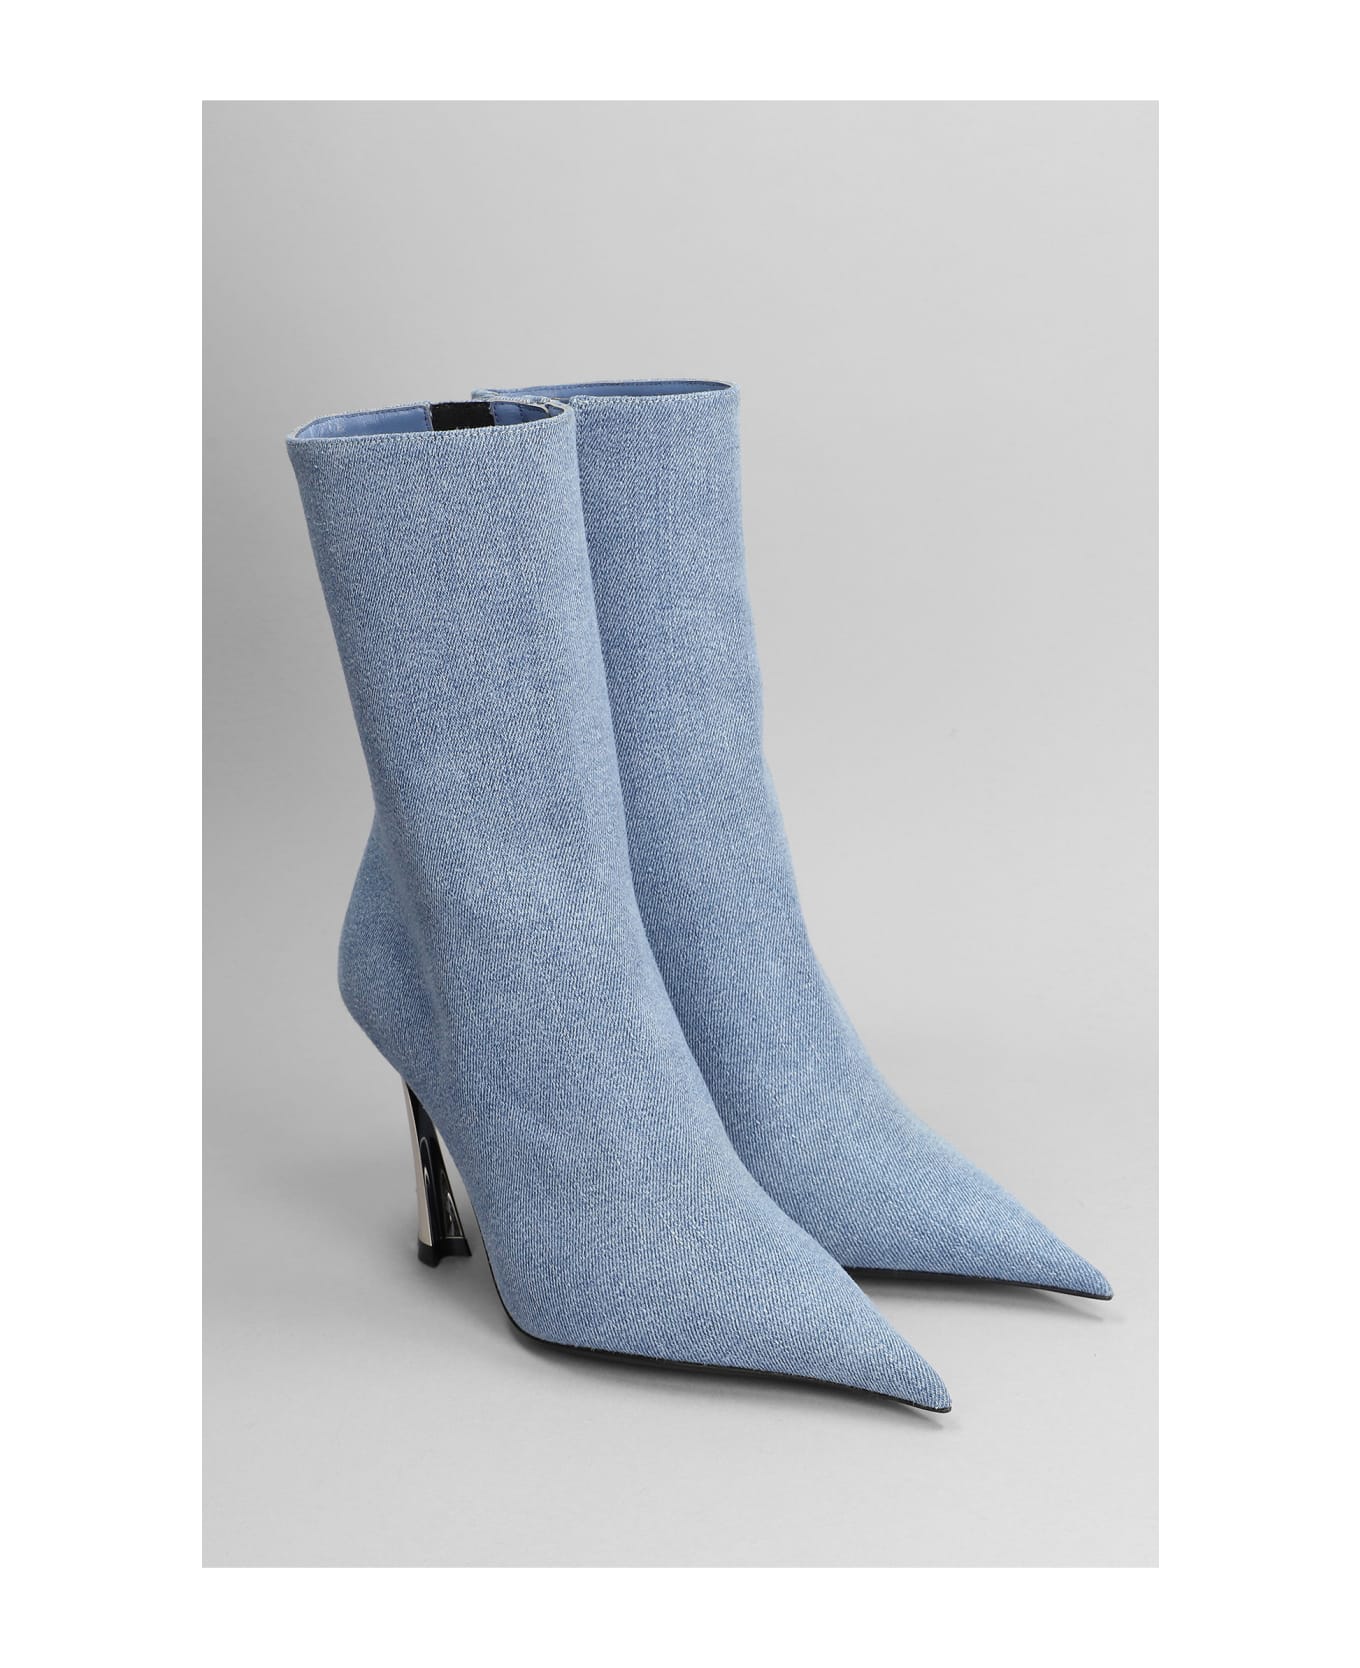 Mugler High Heels Ankle Boots In Blue Cotton - blue